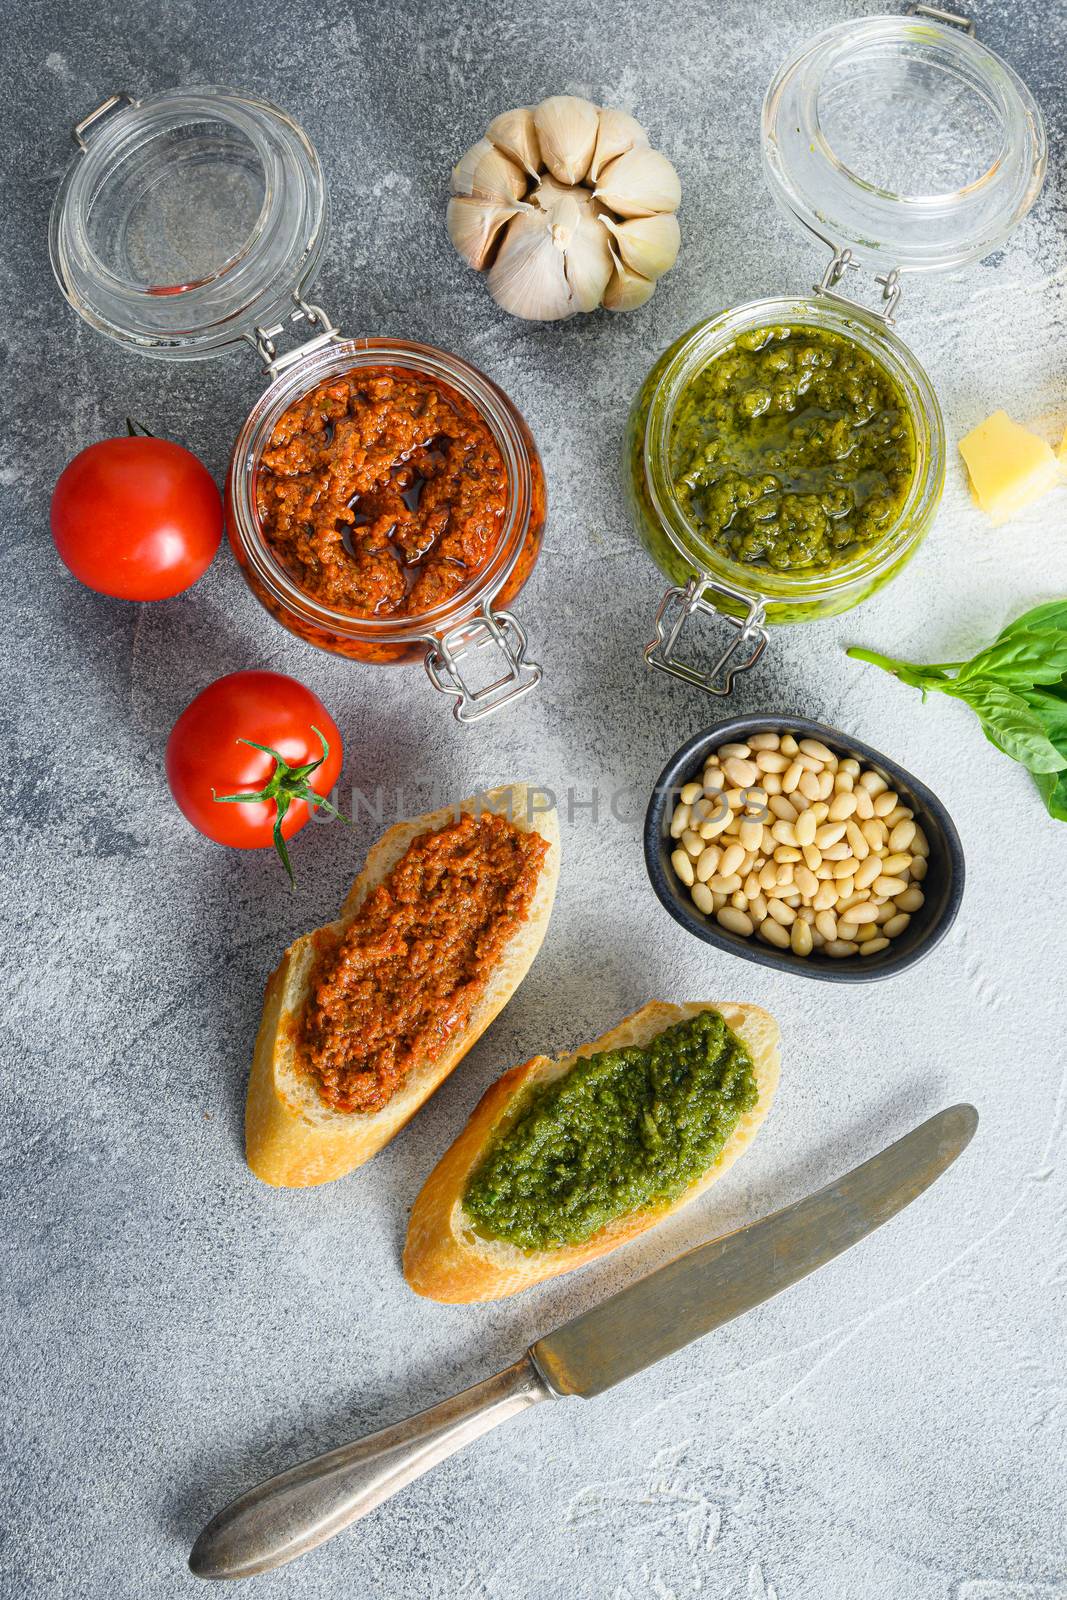 Glass jars with red and green pesto and cooking italian recipe ingredients Parmesan cheese, basil leaves, pine nuts, olive oil, garlic, salt, tomatoes breakfast panini with sauce top view on grey concrete surface .